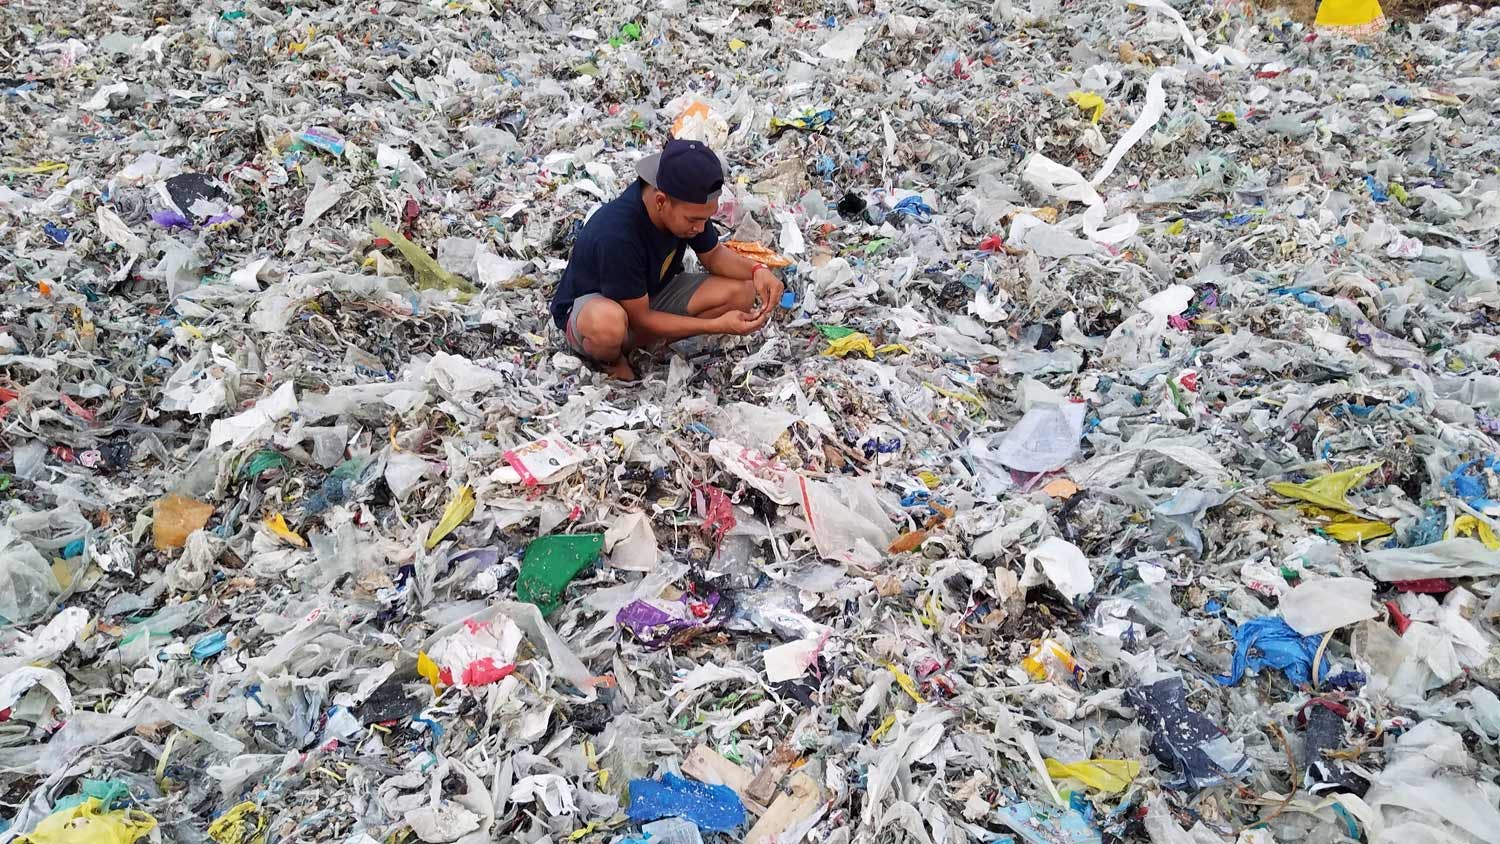 A man crouching amidst a massive pile of plastic garbage.